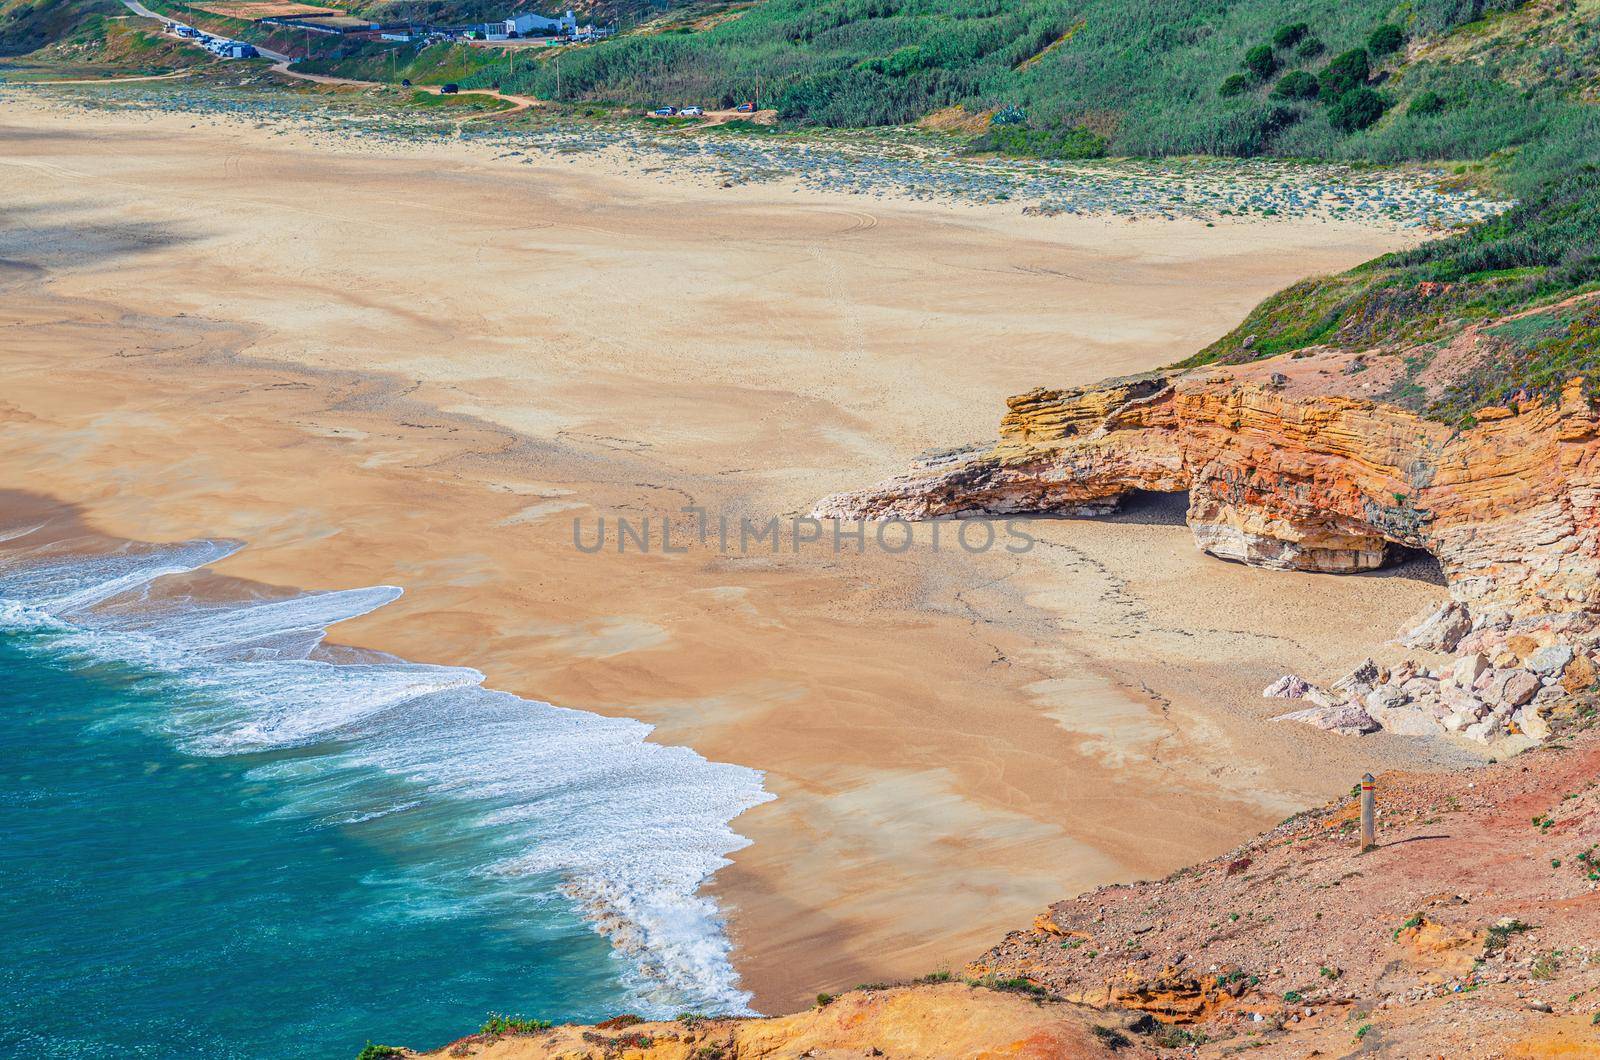 Top aerial view of sandy beach with rocks and cliffs and waves of azure turquoise water of Atlantic Ocean near Nazare town, North beach Praia do Norte, Leiria District, Oeste region, Portugal